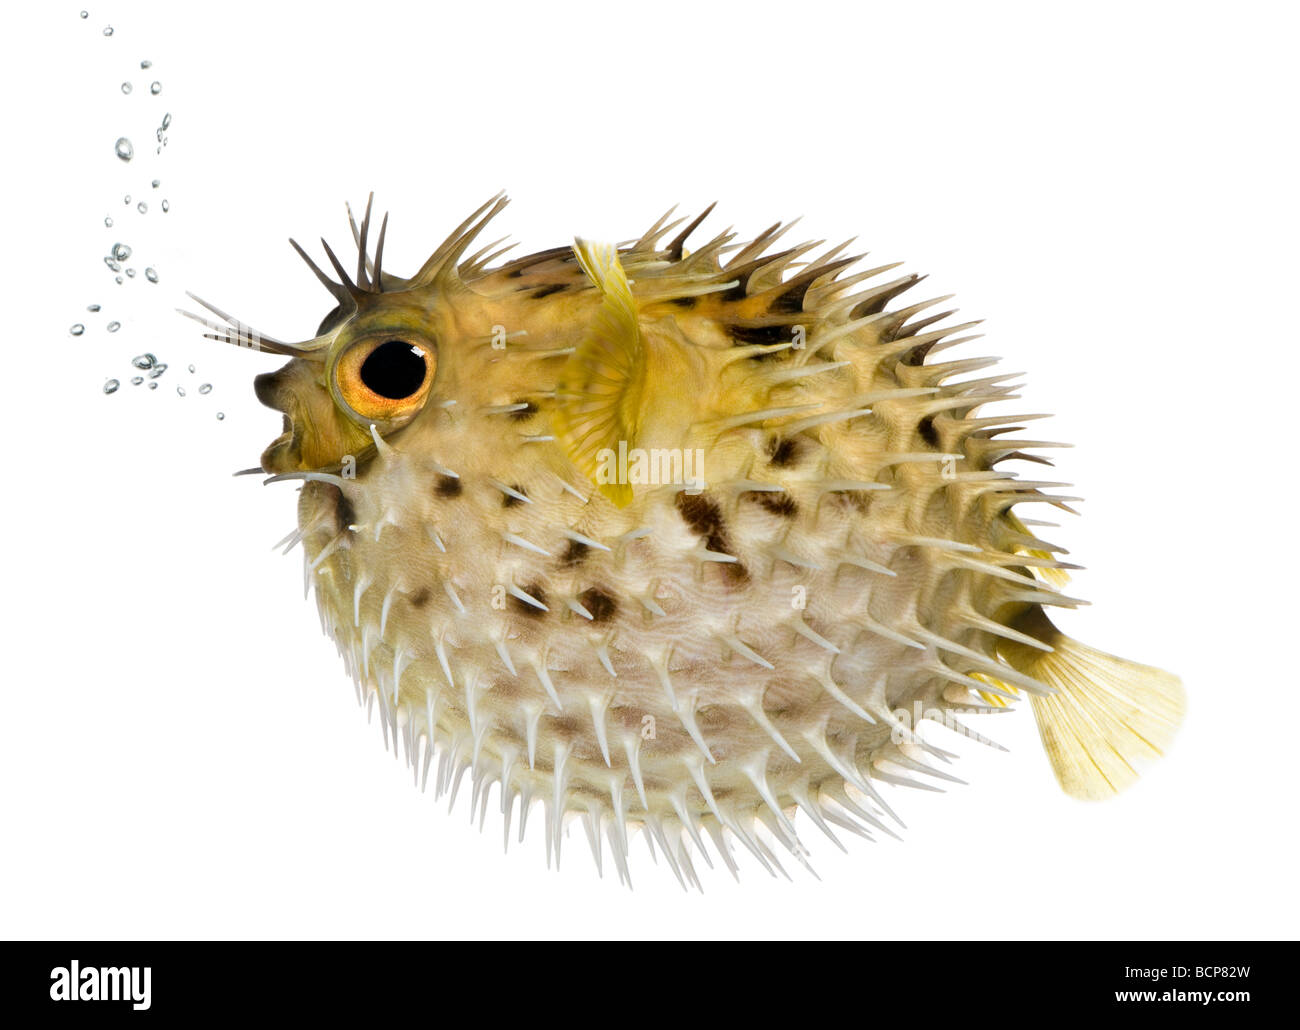 Long spine porcupinefish, also know as spiny balloonfish fish